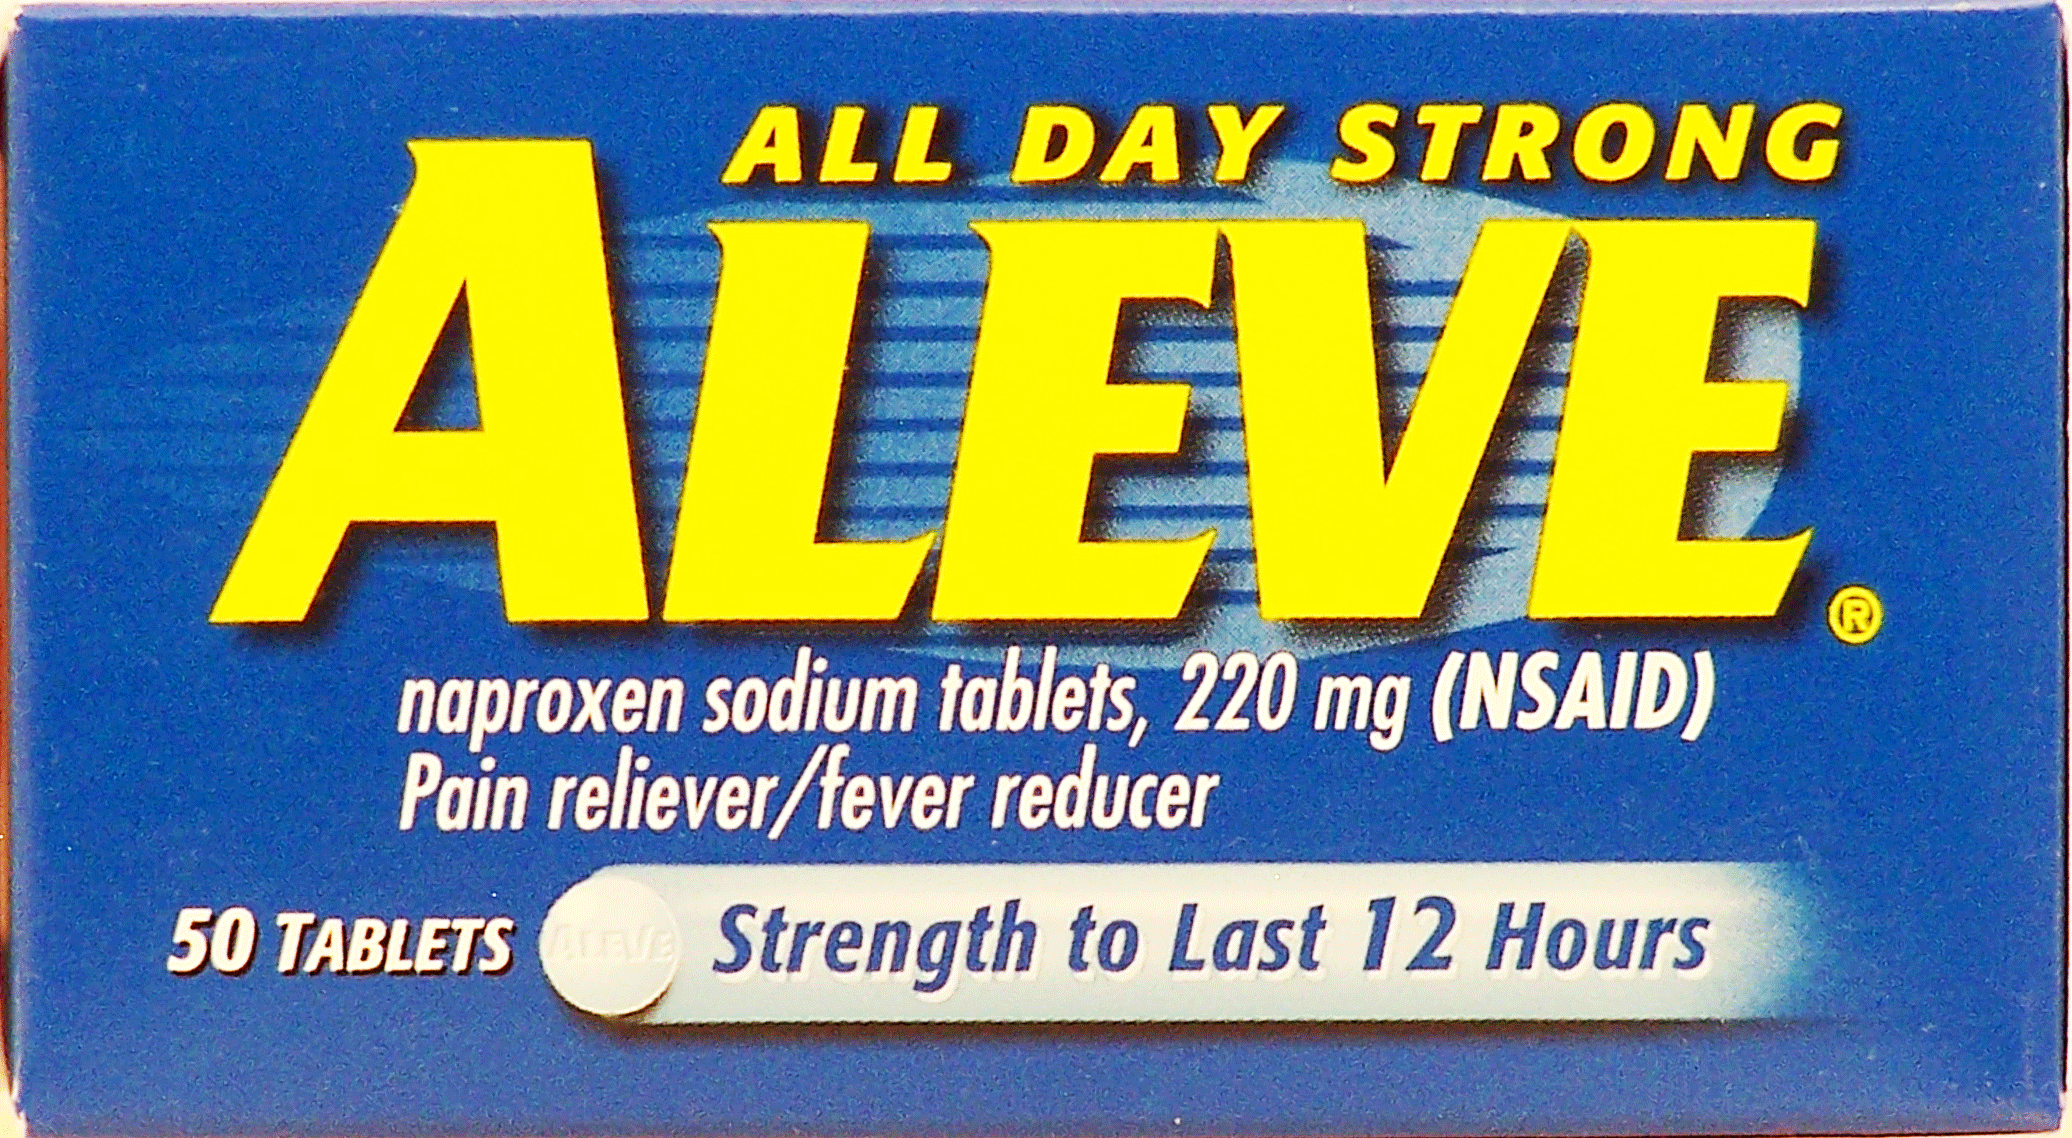 Aleve All Day Strong noproxen sodium tablets, 220mg pain reliever/fever reducer Full-Size Picture